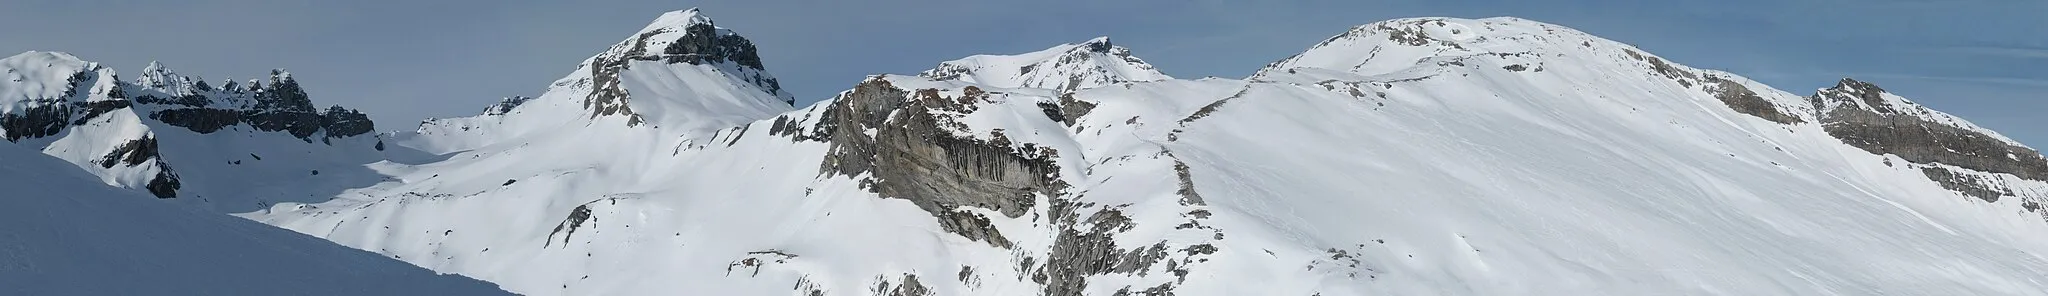 Photo showing: Panorama of mountains in Flims - from left Ofen, Tschingelhörner, Atlas (covering the higher Piz Segnas), Piz Dolf, Fil de Cassons